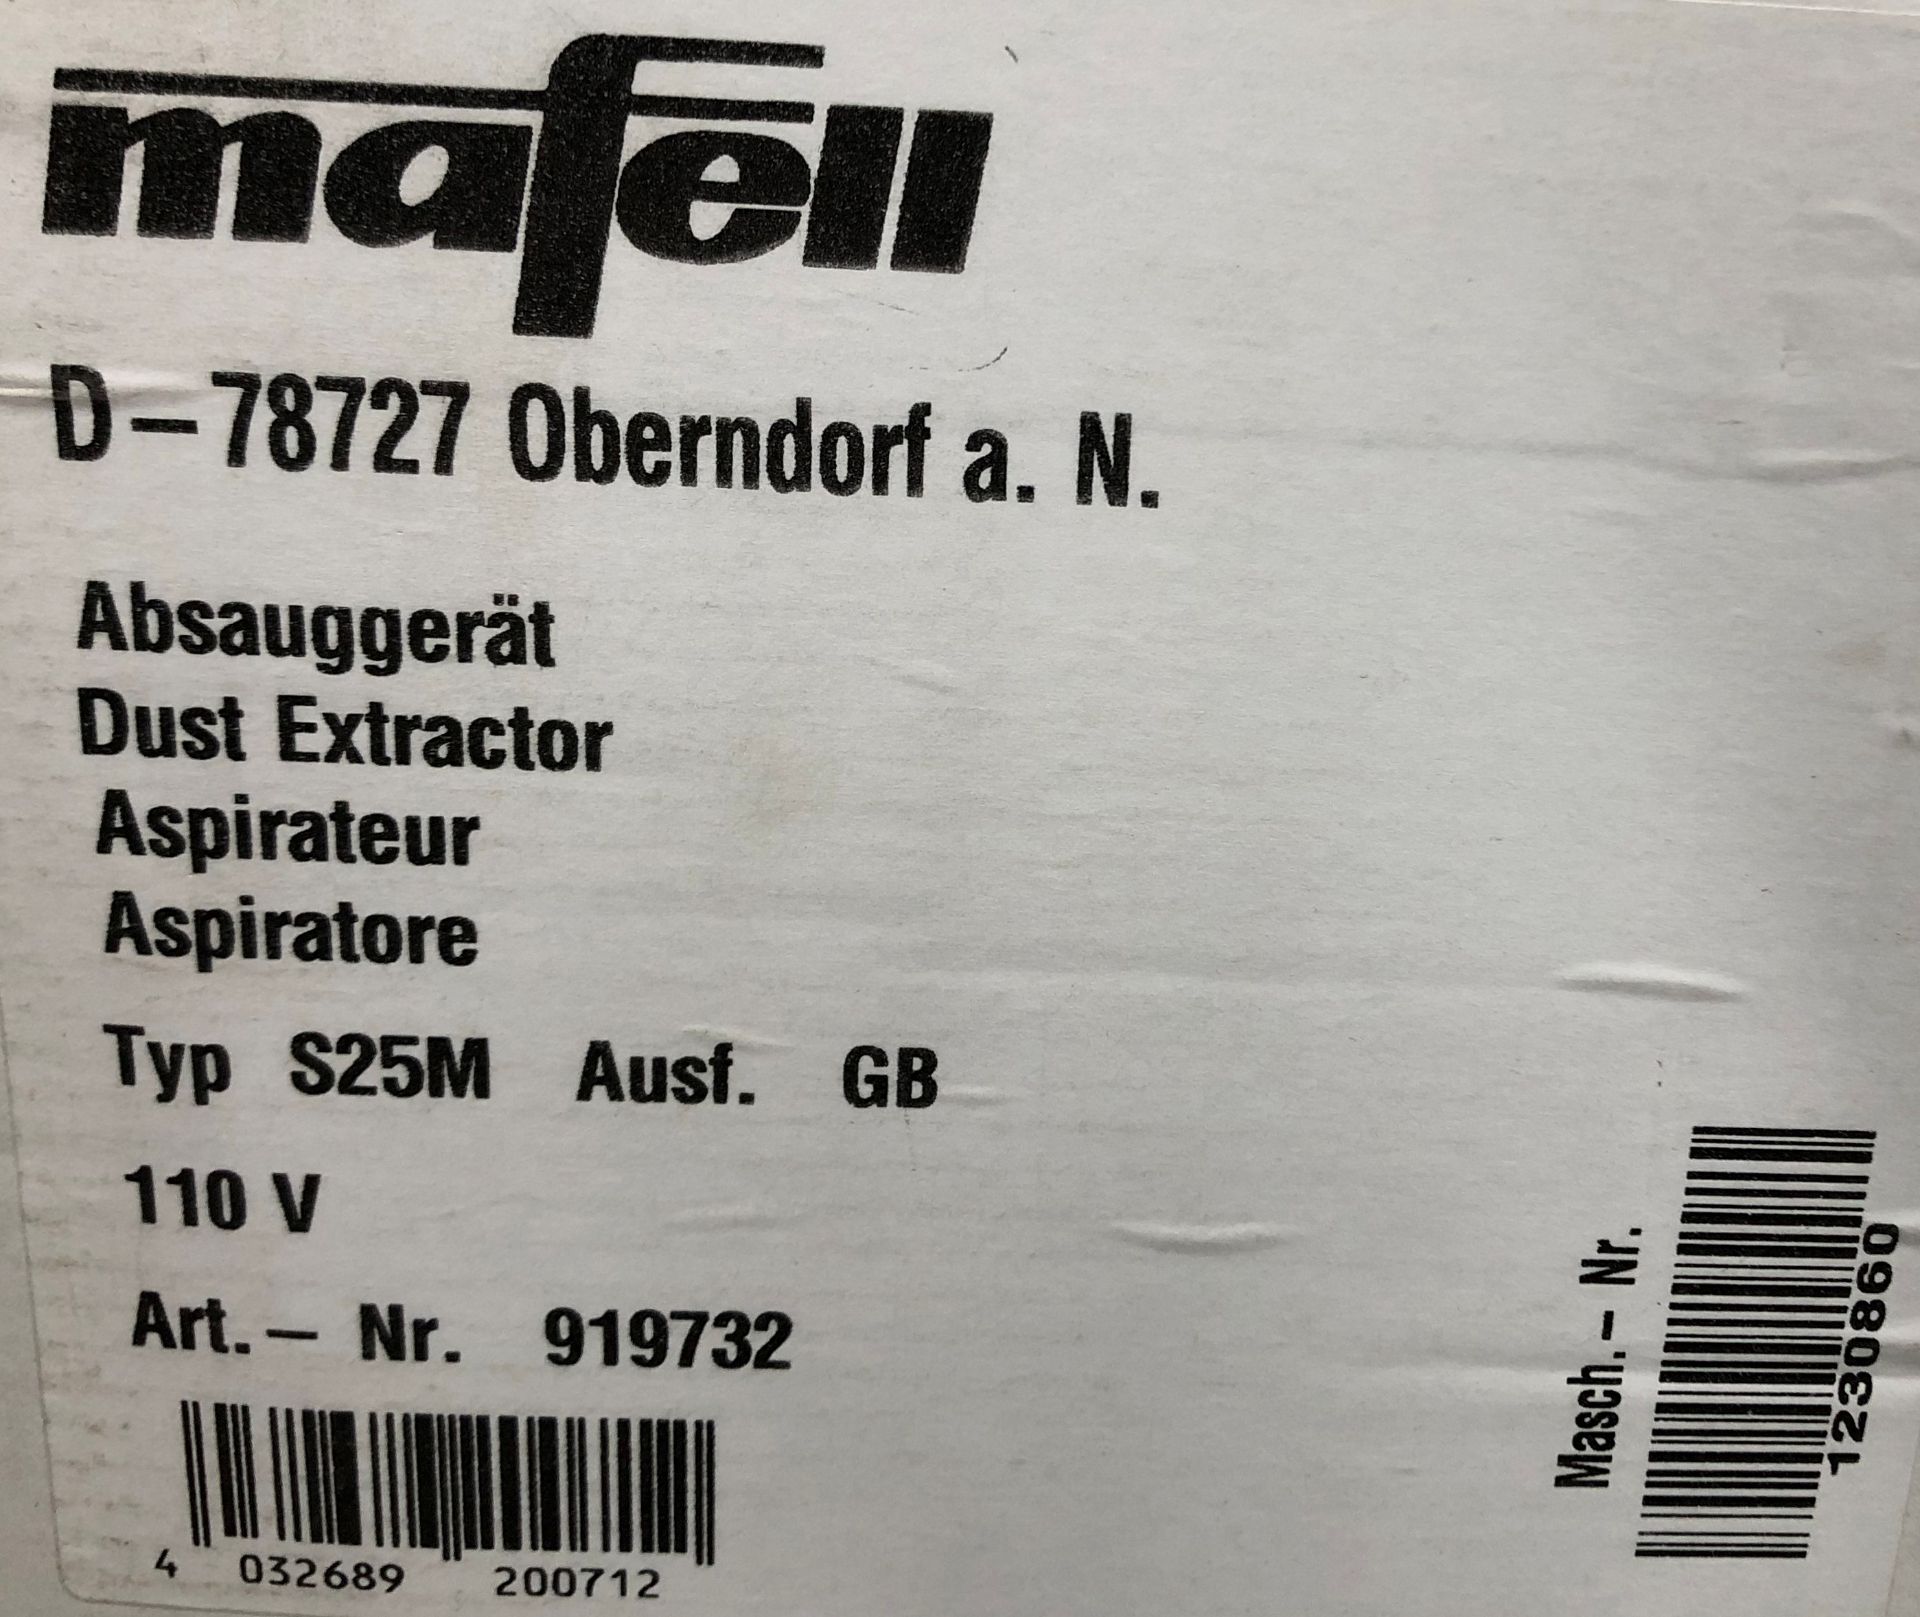 1 x Mafell Dust Extractor|110v|S25M | EAN: 4032689200712 | RRP £539 - Image 2 of 3